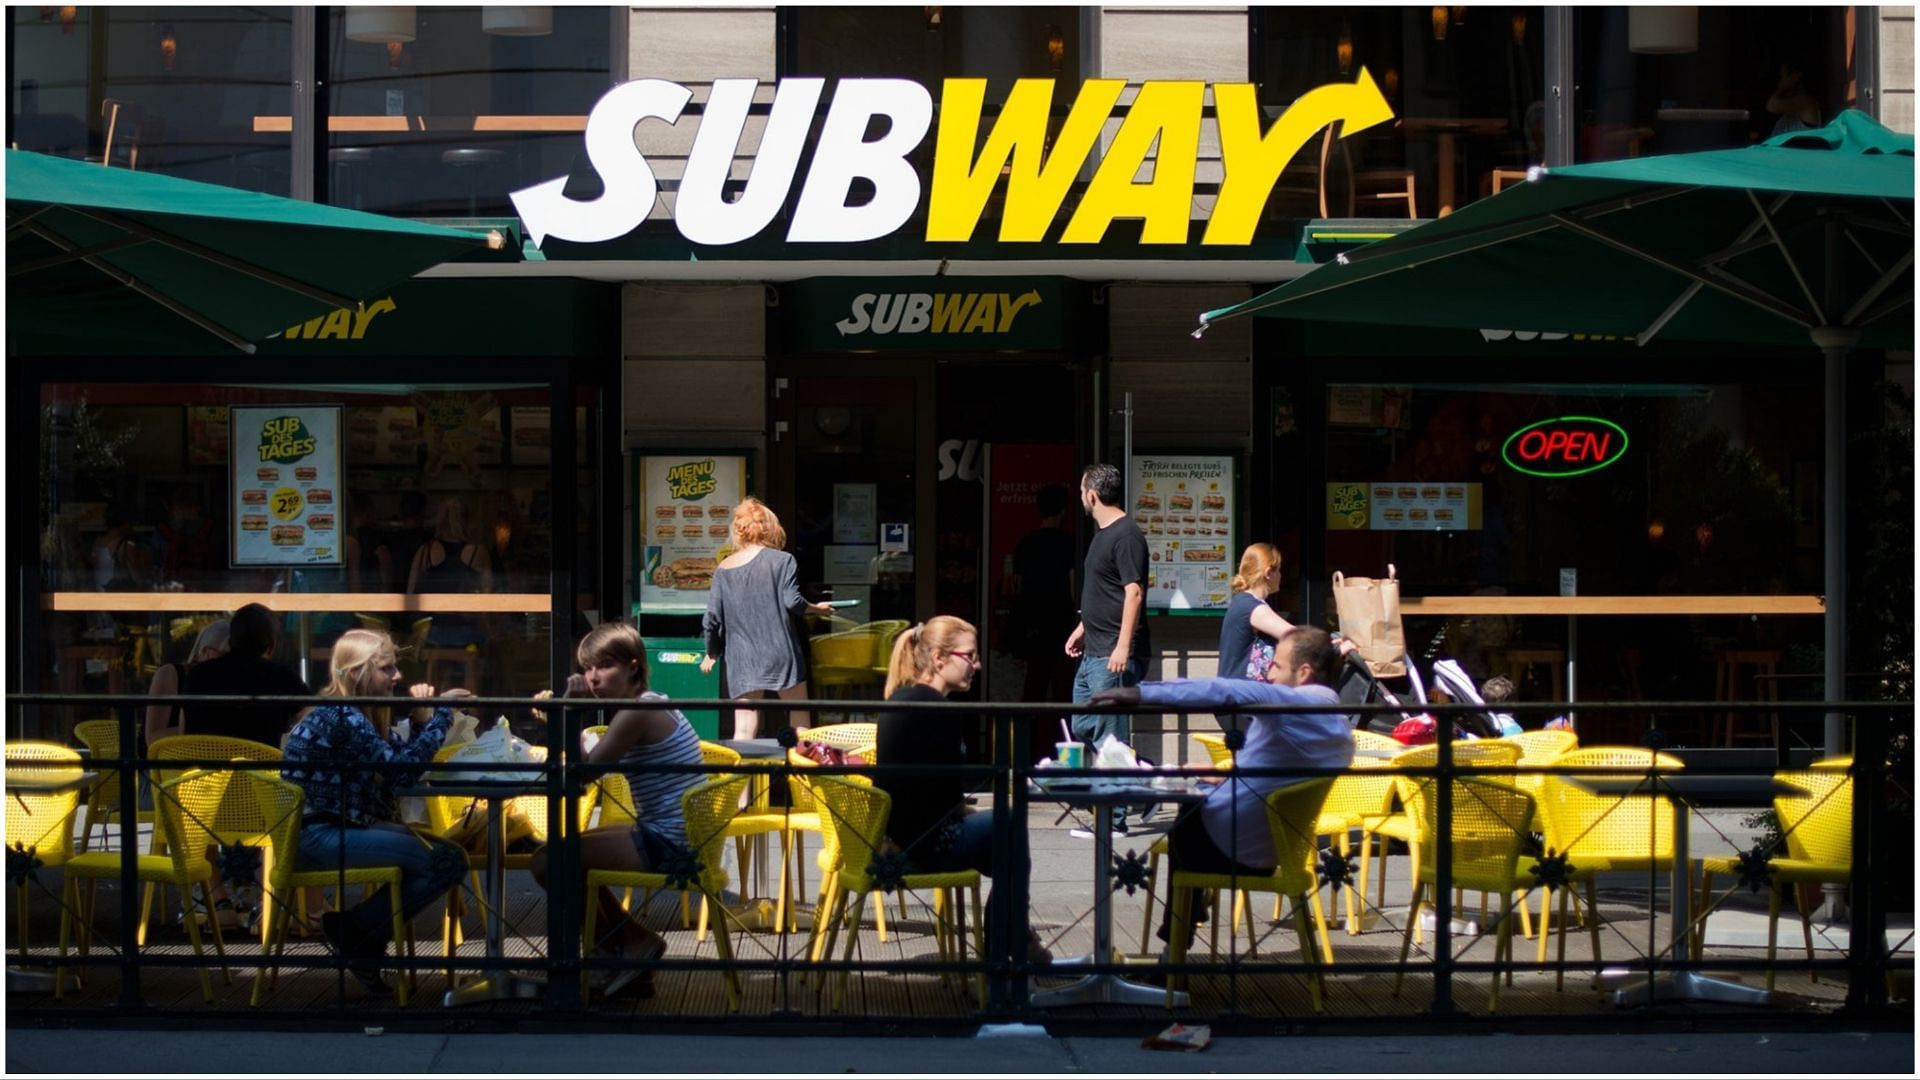 Subway Footlong Pass returns to the sandwich chain for a limited time (Image via Picture Alliance/Getty Images)